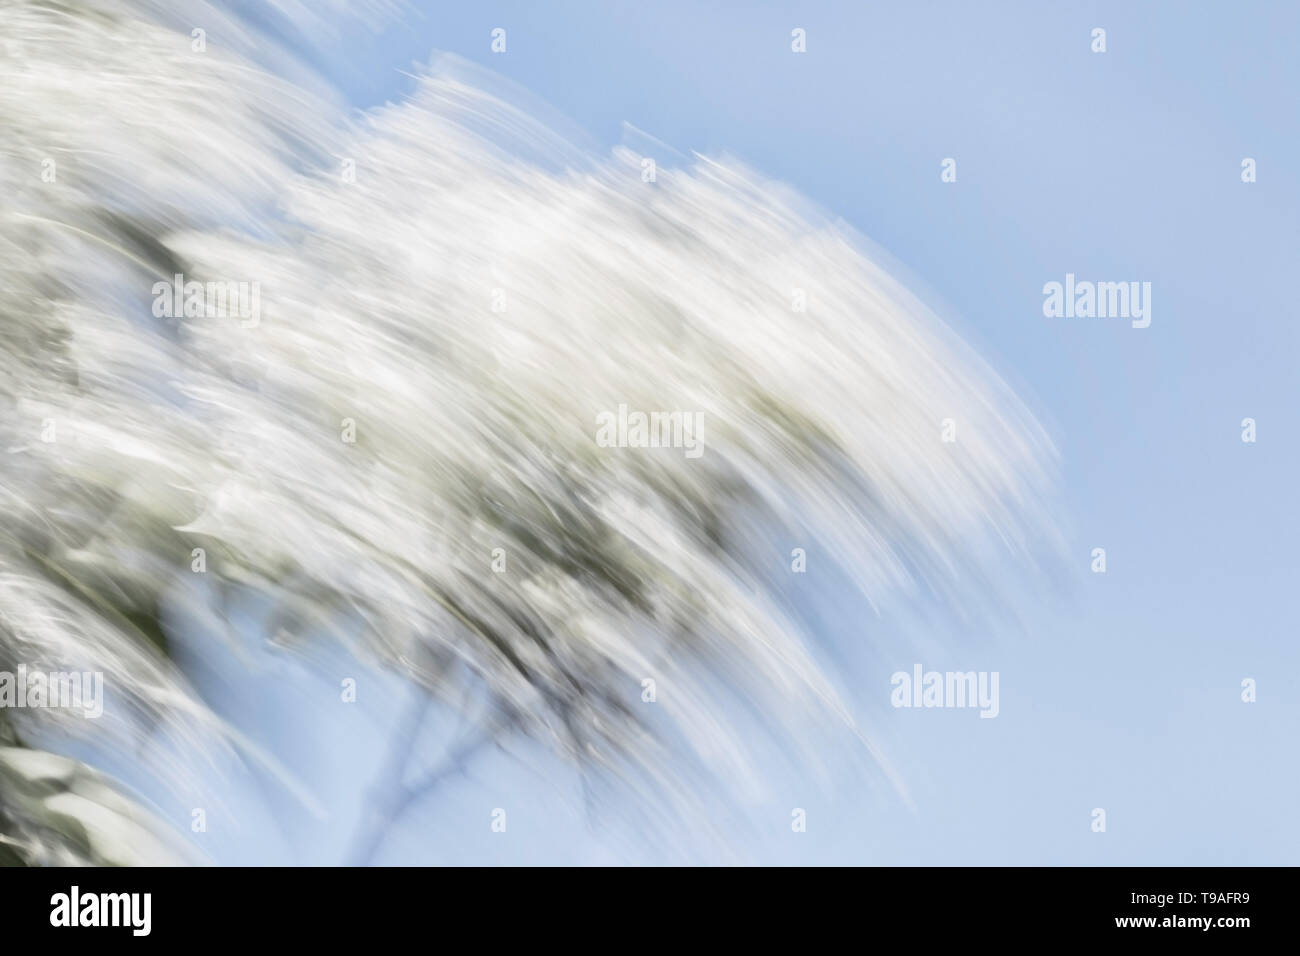 Abstract photograph of leaves and branches, created using intentional camera movement. Stock Photo